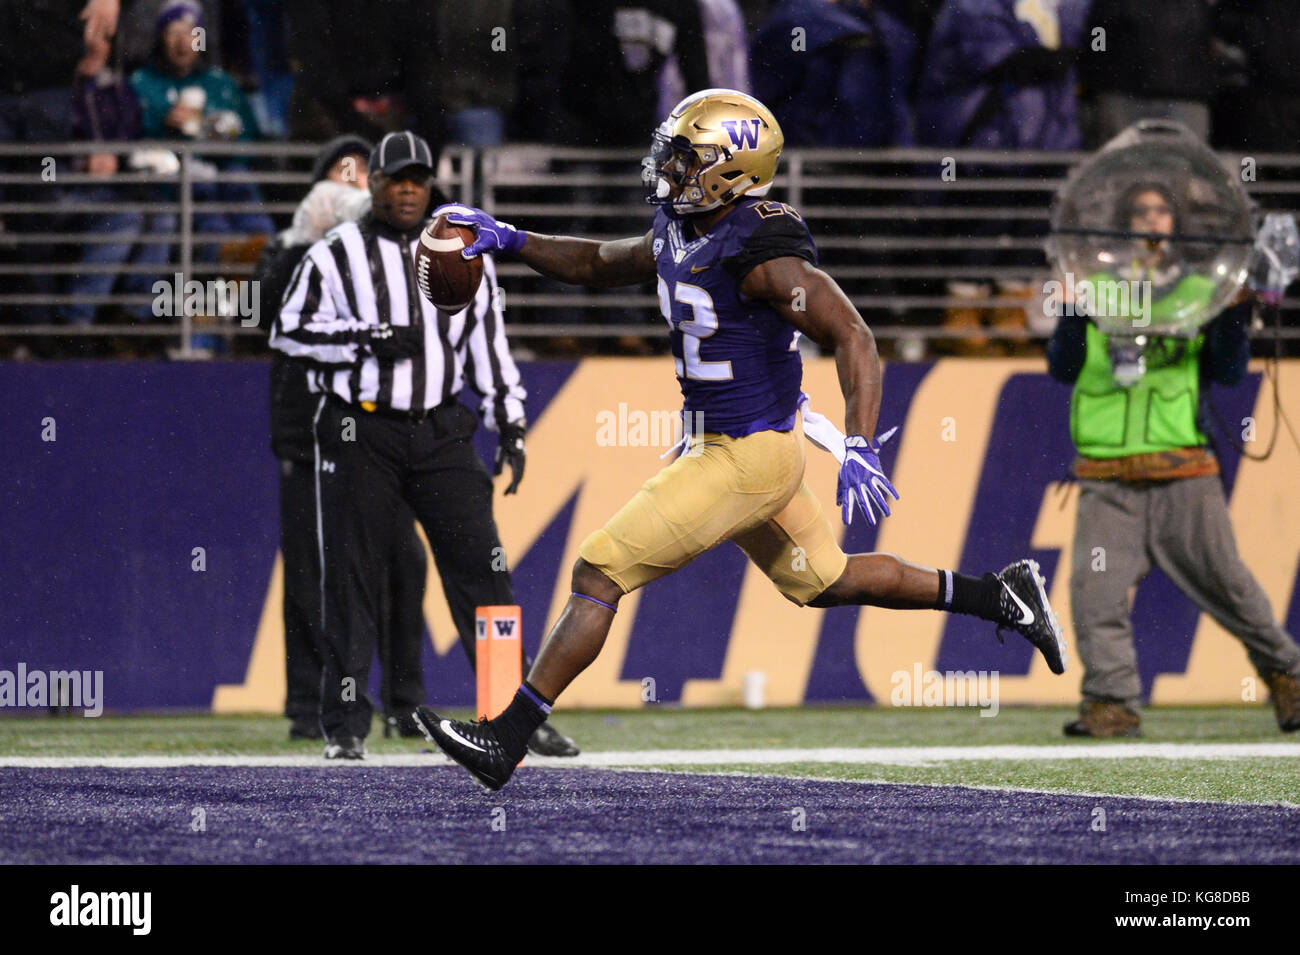 Seattle, WA, USA. 4th Nov, 2017. UW tailback Lavon Coleman (22) scores on a 31 yard pass play from Jake Browning (3) in a PAC12 football game between the Oregon Ducks and the Washington Huskies. The game was played at Husky Stadium on the University of Washington campus in Seattle, WA. Jeff Halstead/CSM/Alamy Live News Stock Photo